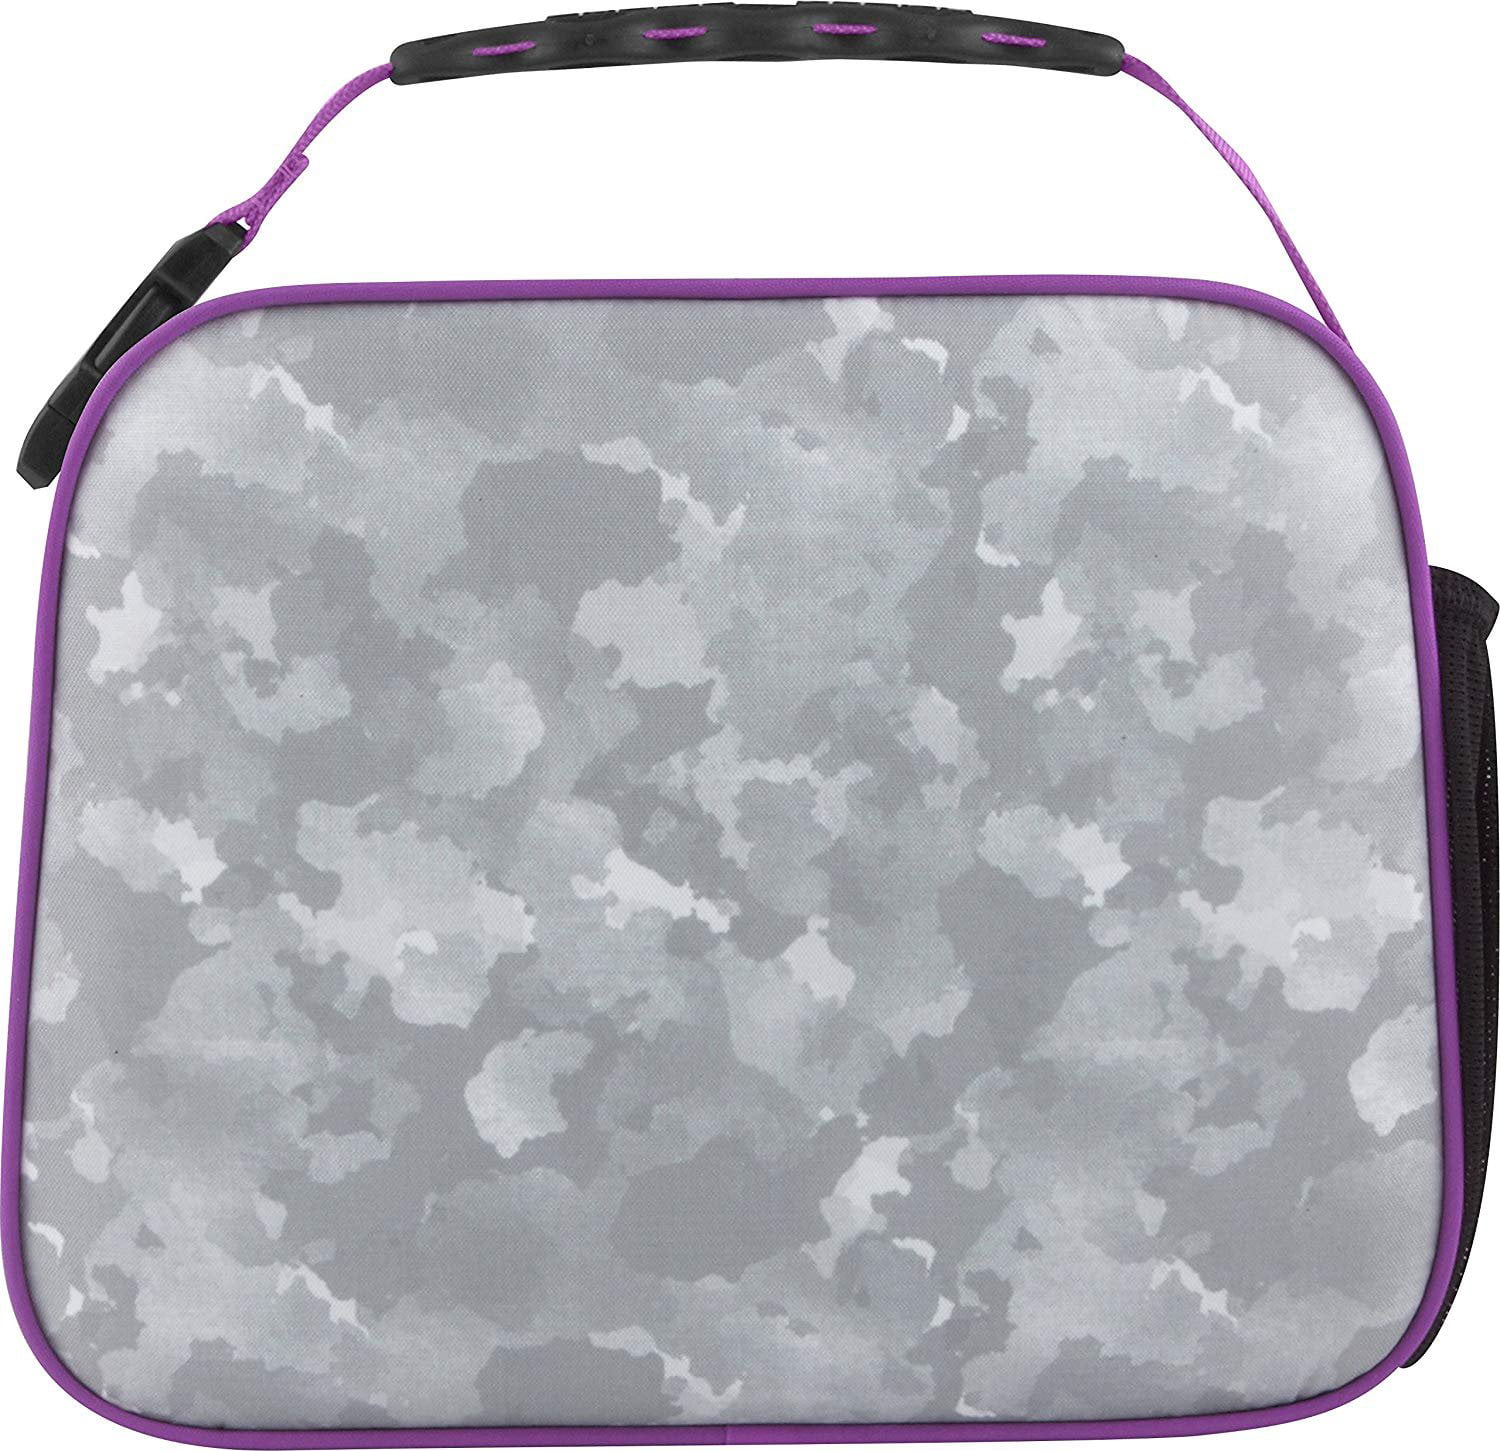 Under Armour Lunch Box, Tropic Pink